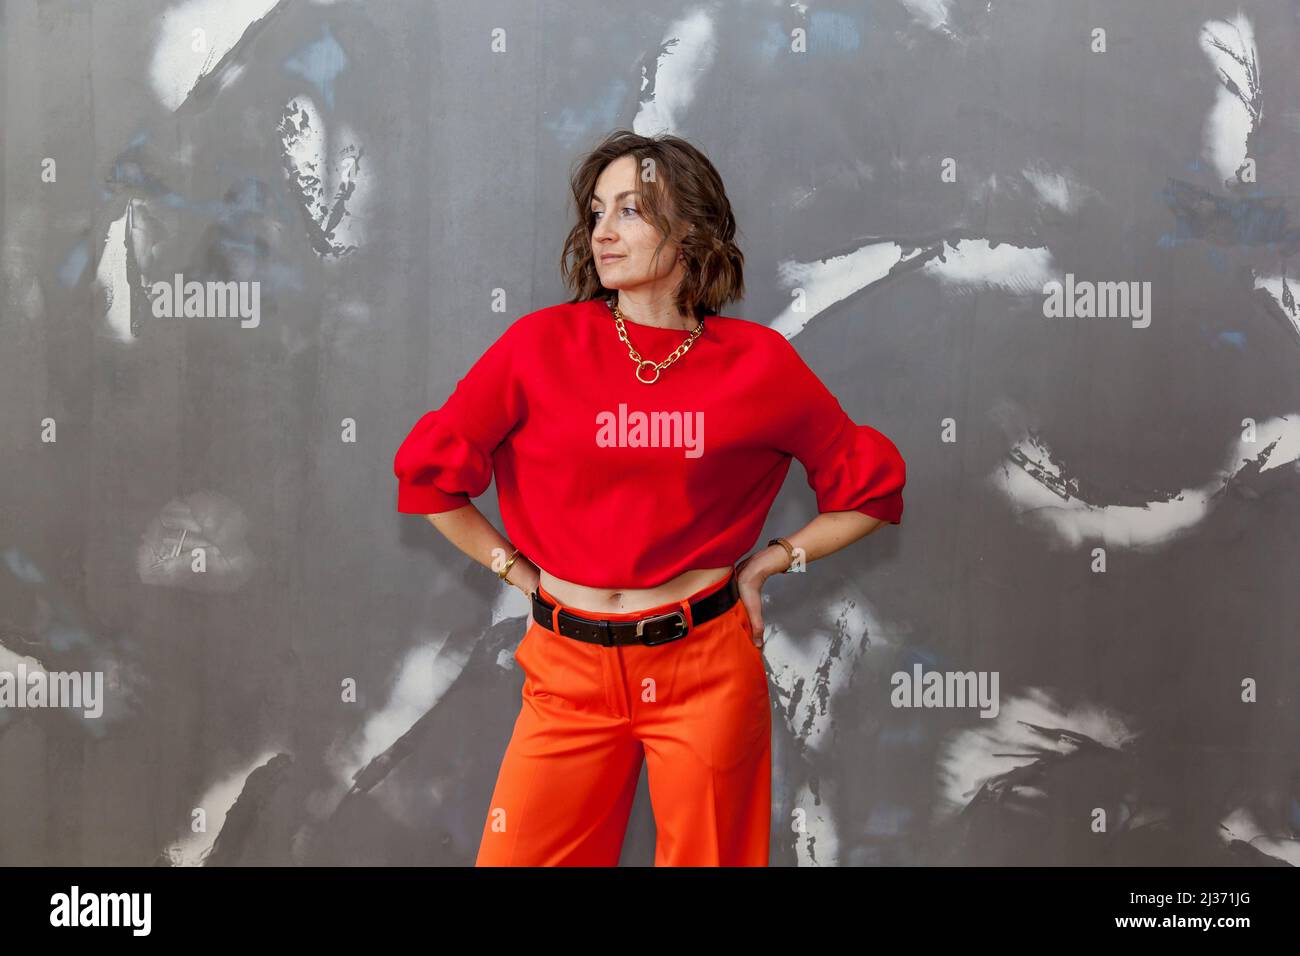 Fashionable and stylish girl posing in orange pants, a red sweater against a gray wall Stock Photo